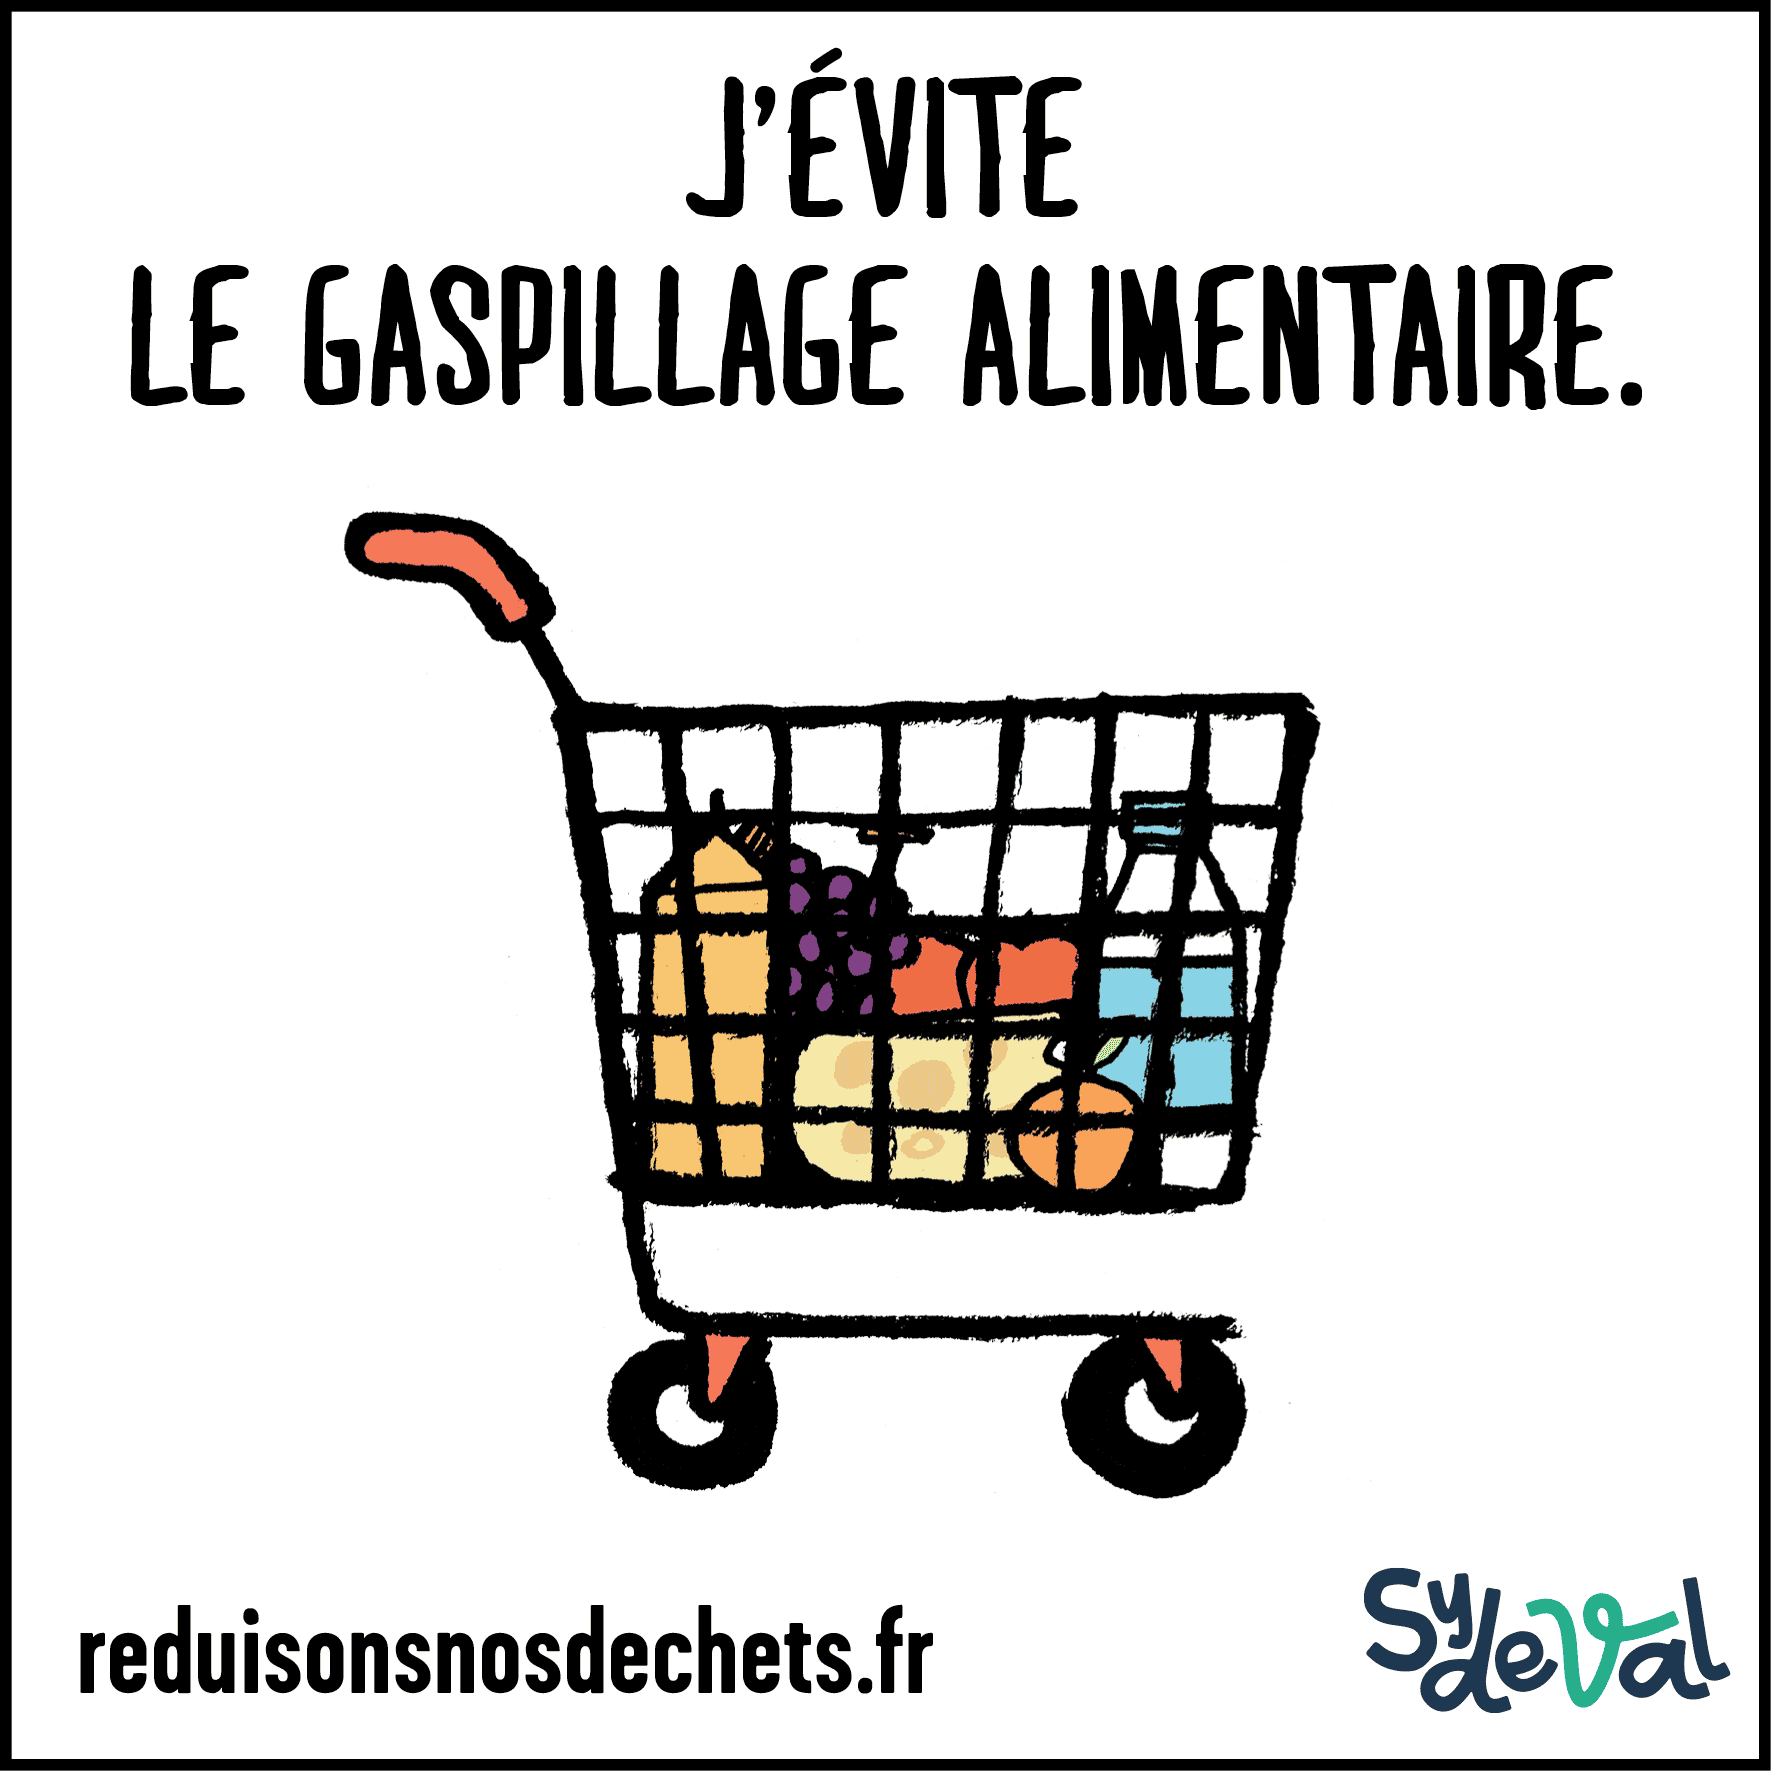 REDUIRE SES DECHETS GASPILLAGE-ALIMENTAIRE credit ademe